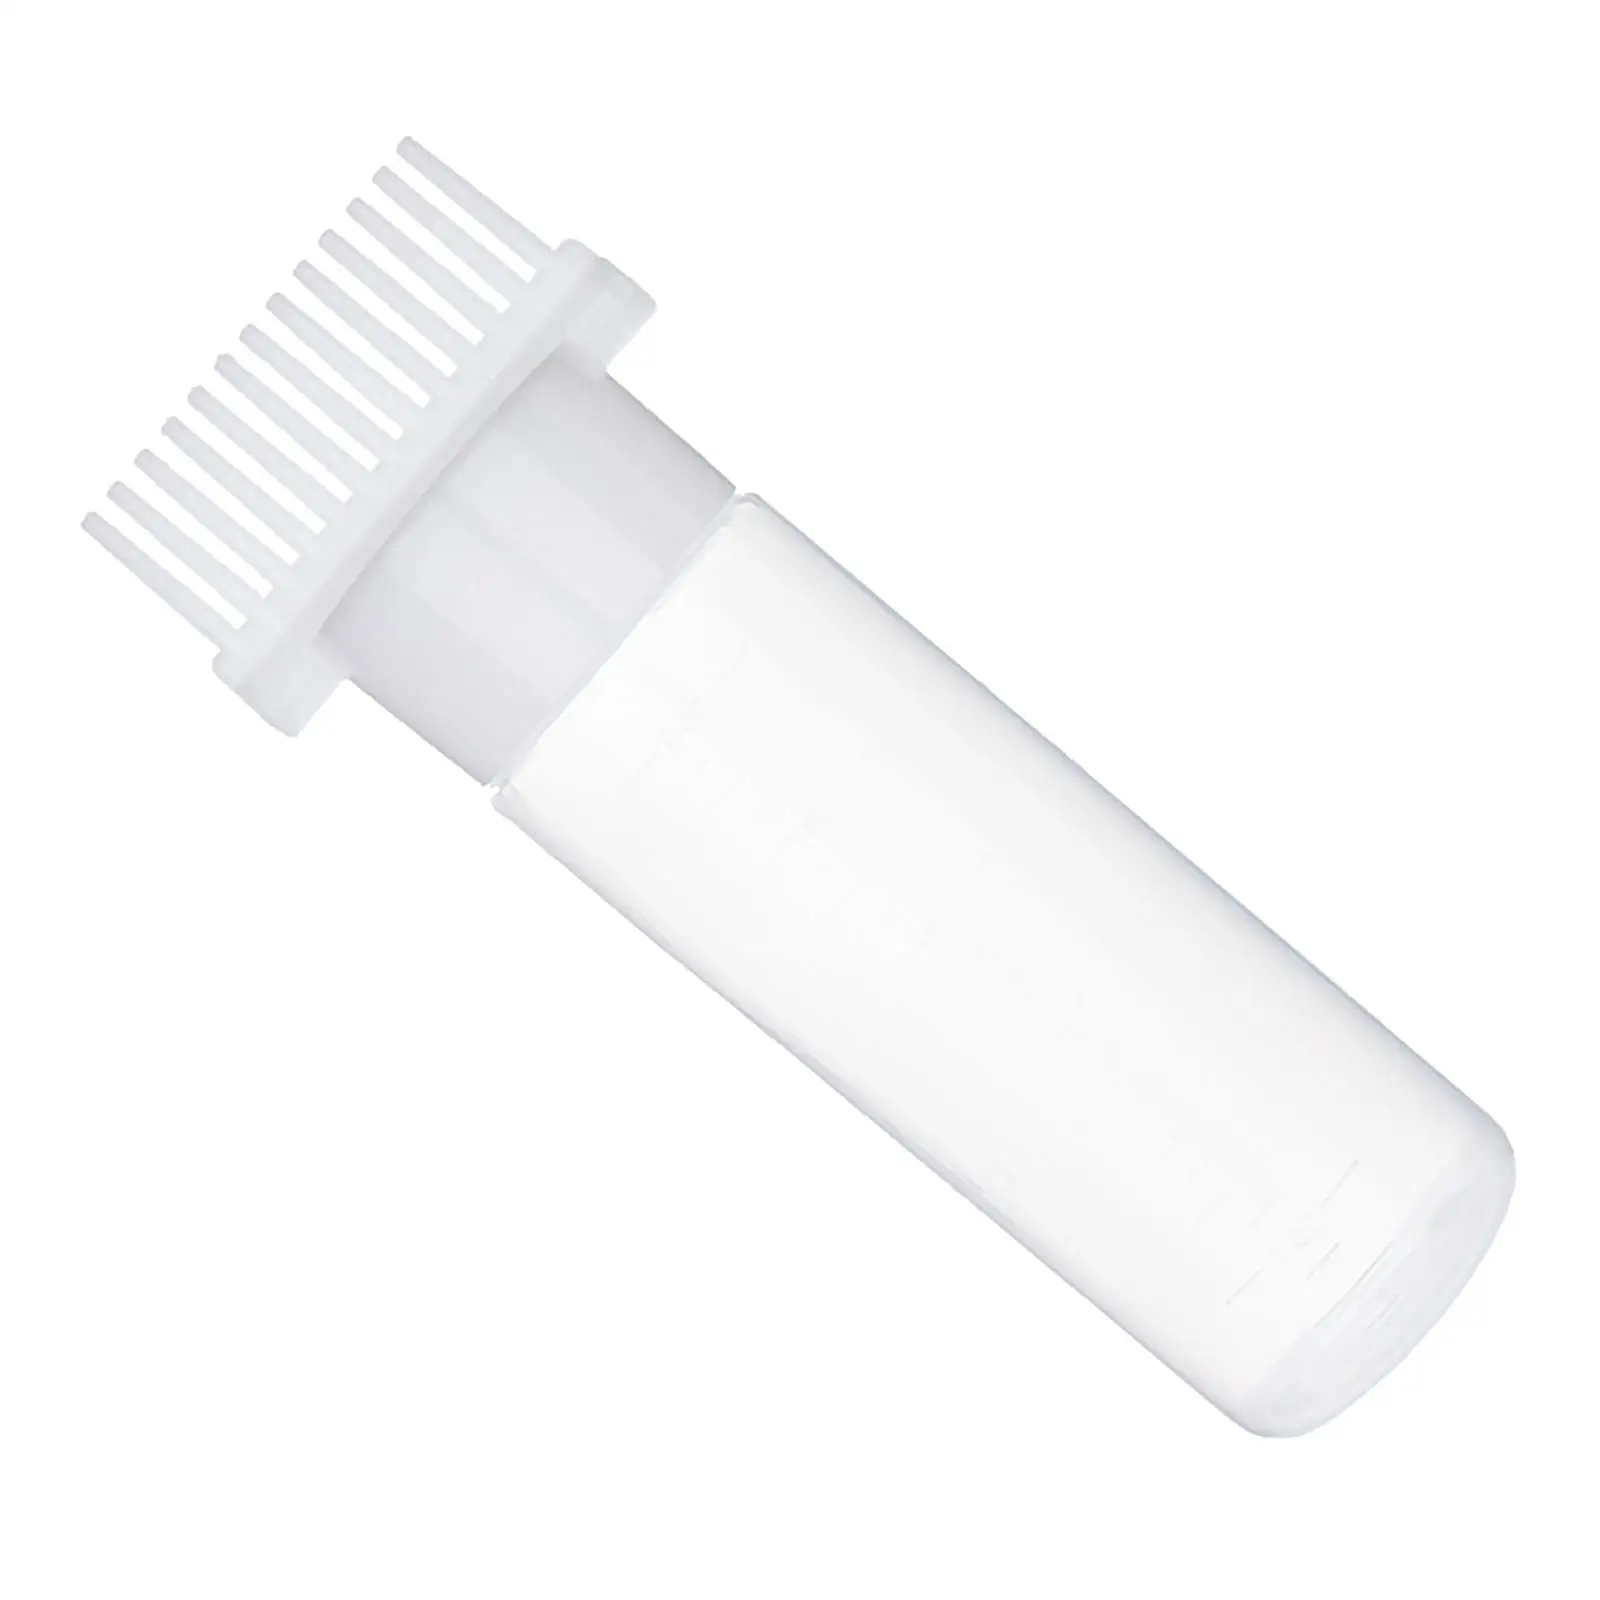 Root Comb Applicator Bottle 180ml Empty Perming Hairdressing Tool Squeeze Bottle Hair Oil Applicator for Home Salon Barbershop